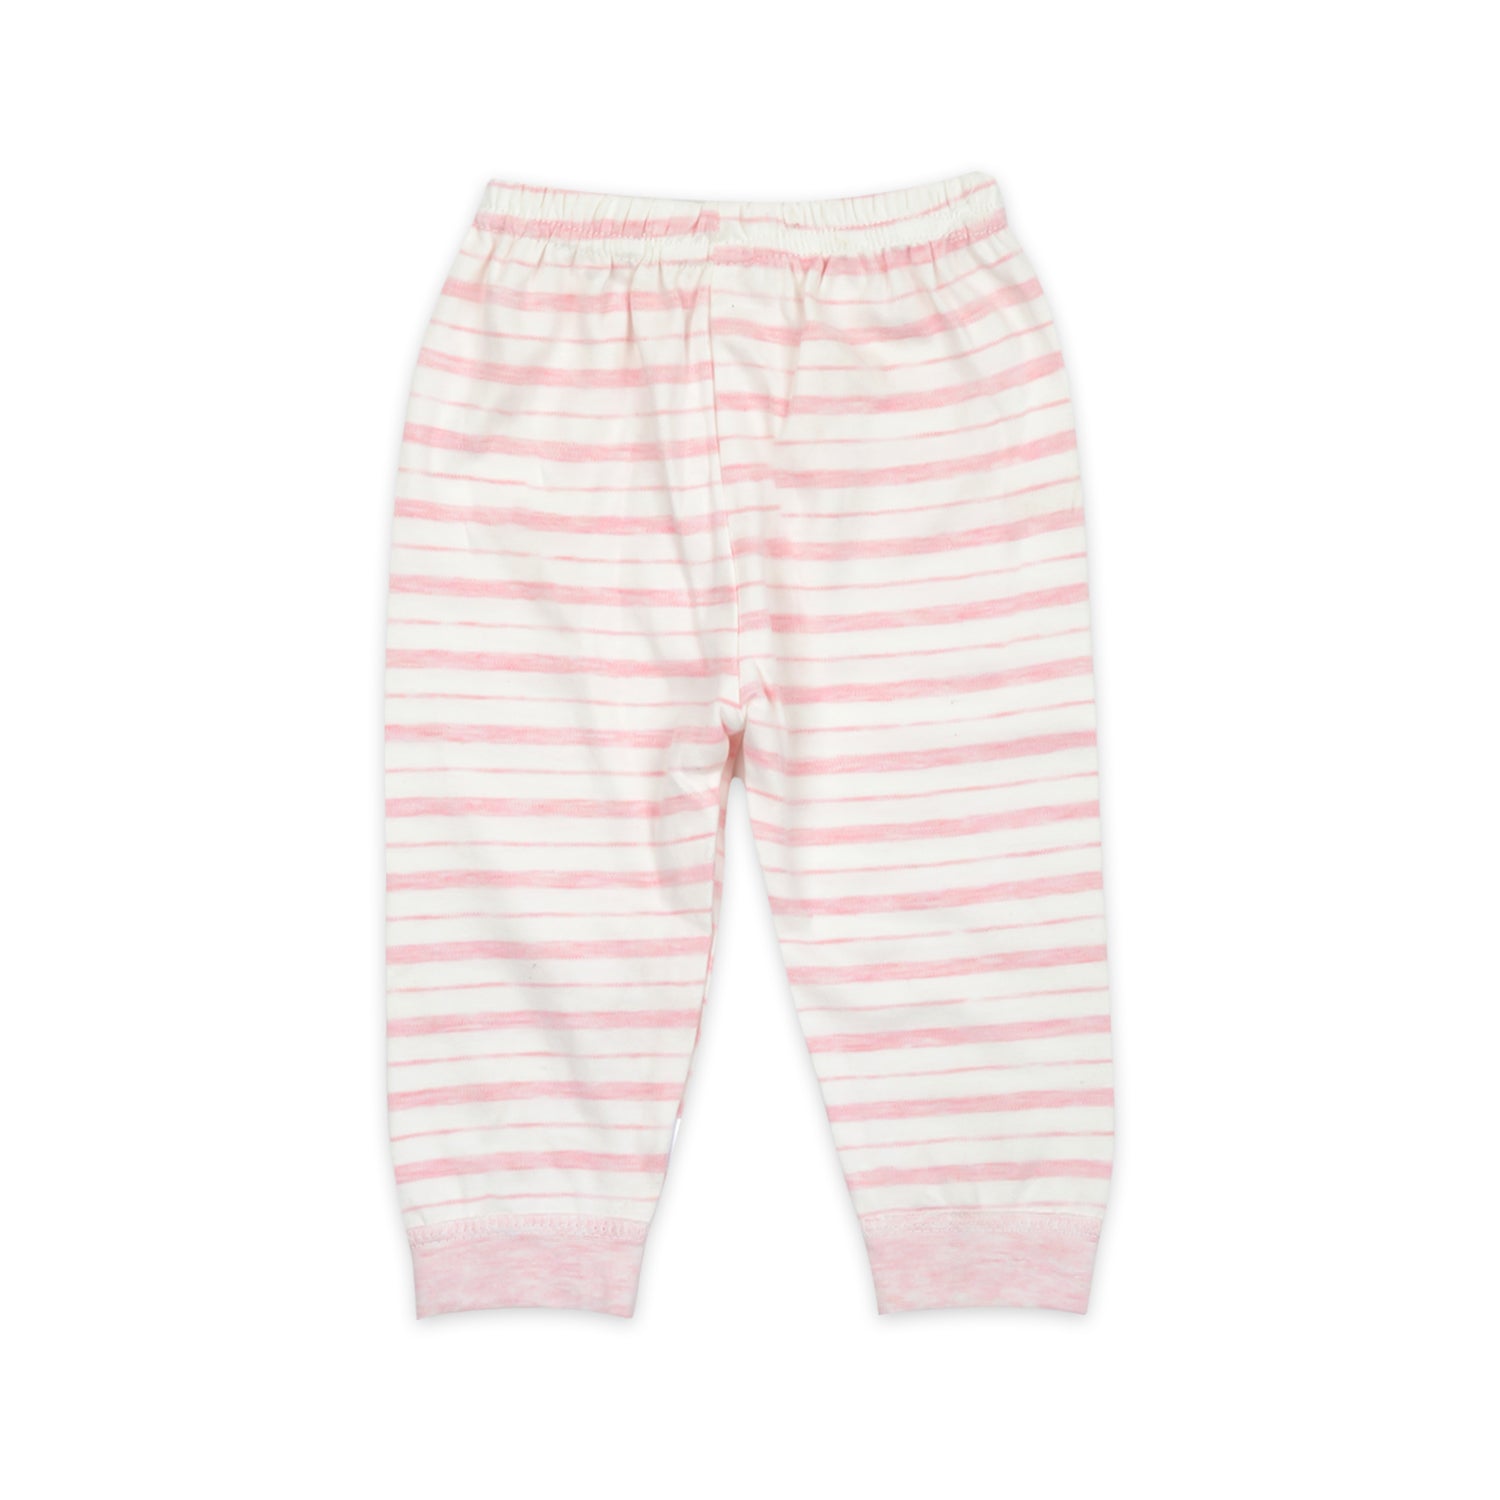 Baby Organic Cotton Co-ord Set- Pink | Heart